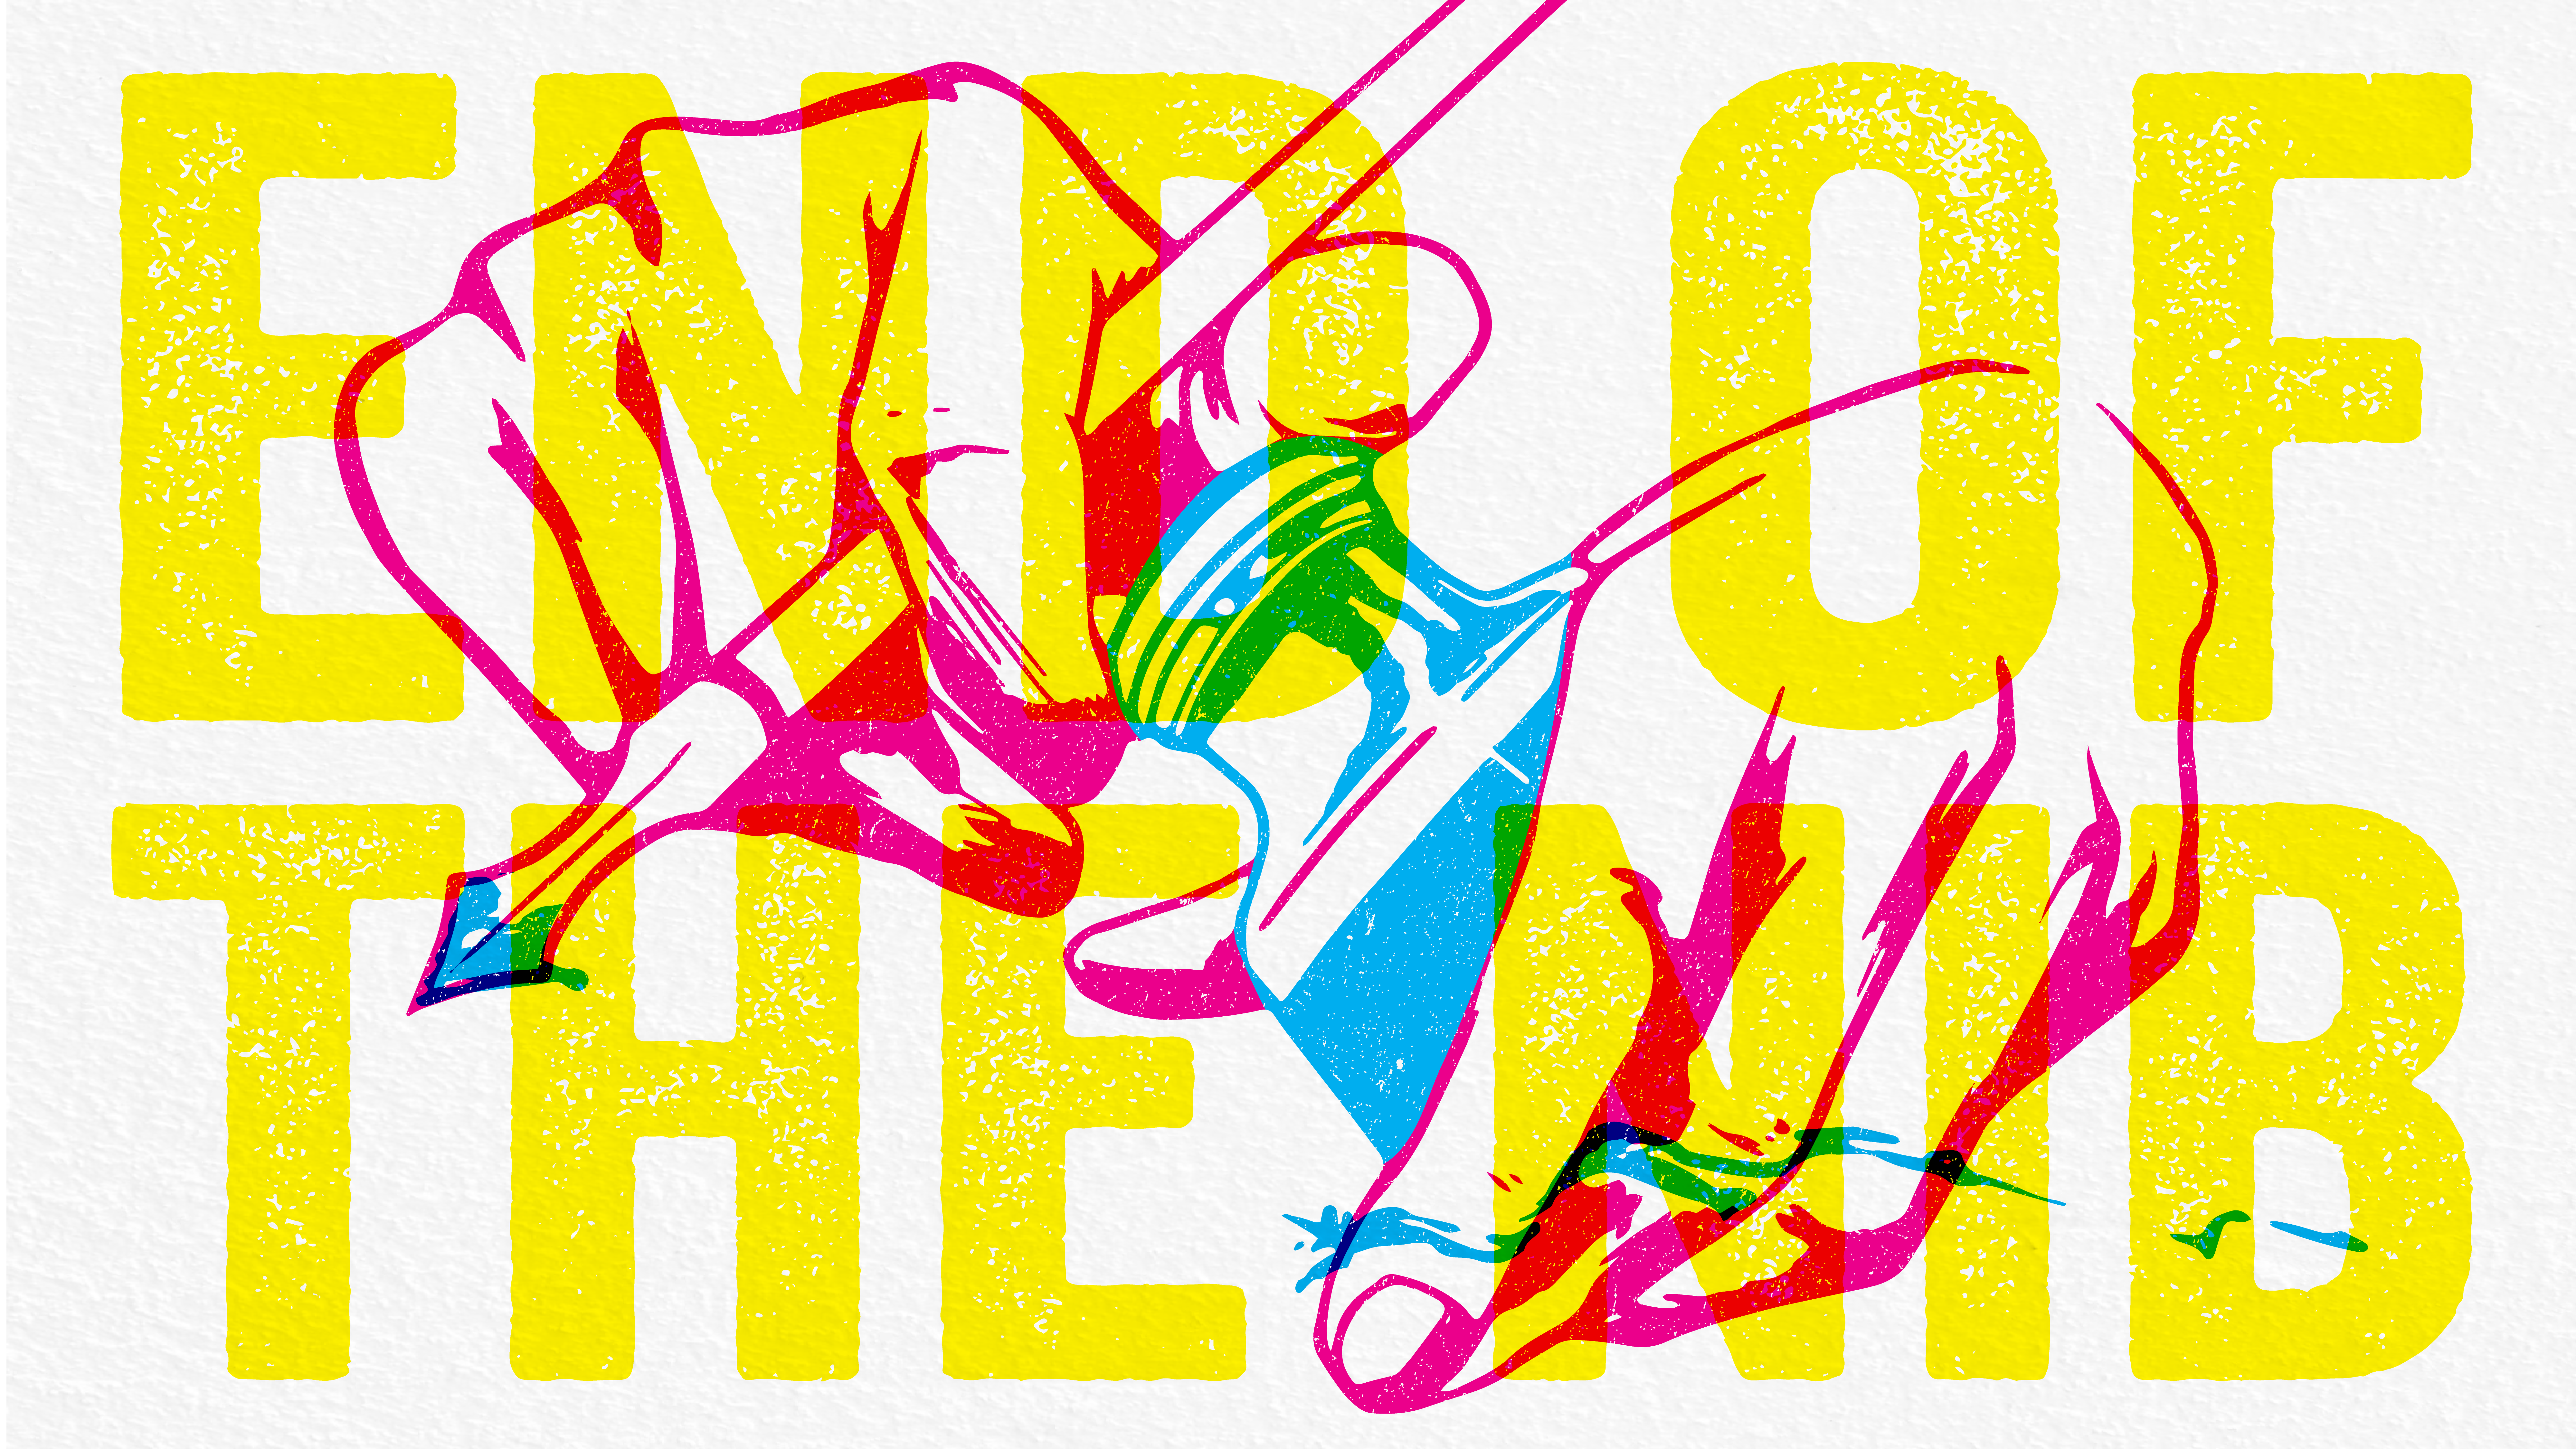 Pink hands hold a ink bottle and nib pen. The hands are closing the ink bottle. Yellow text overlays the image that says, "End of the the Nib" in all caps.